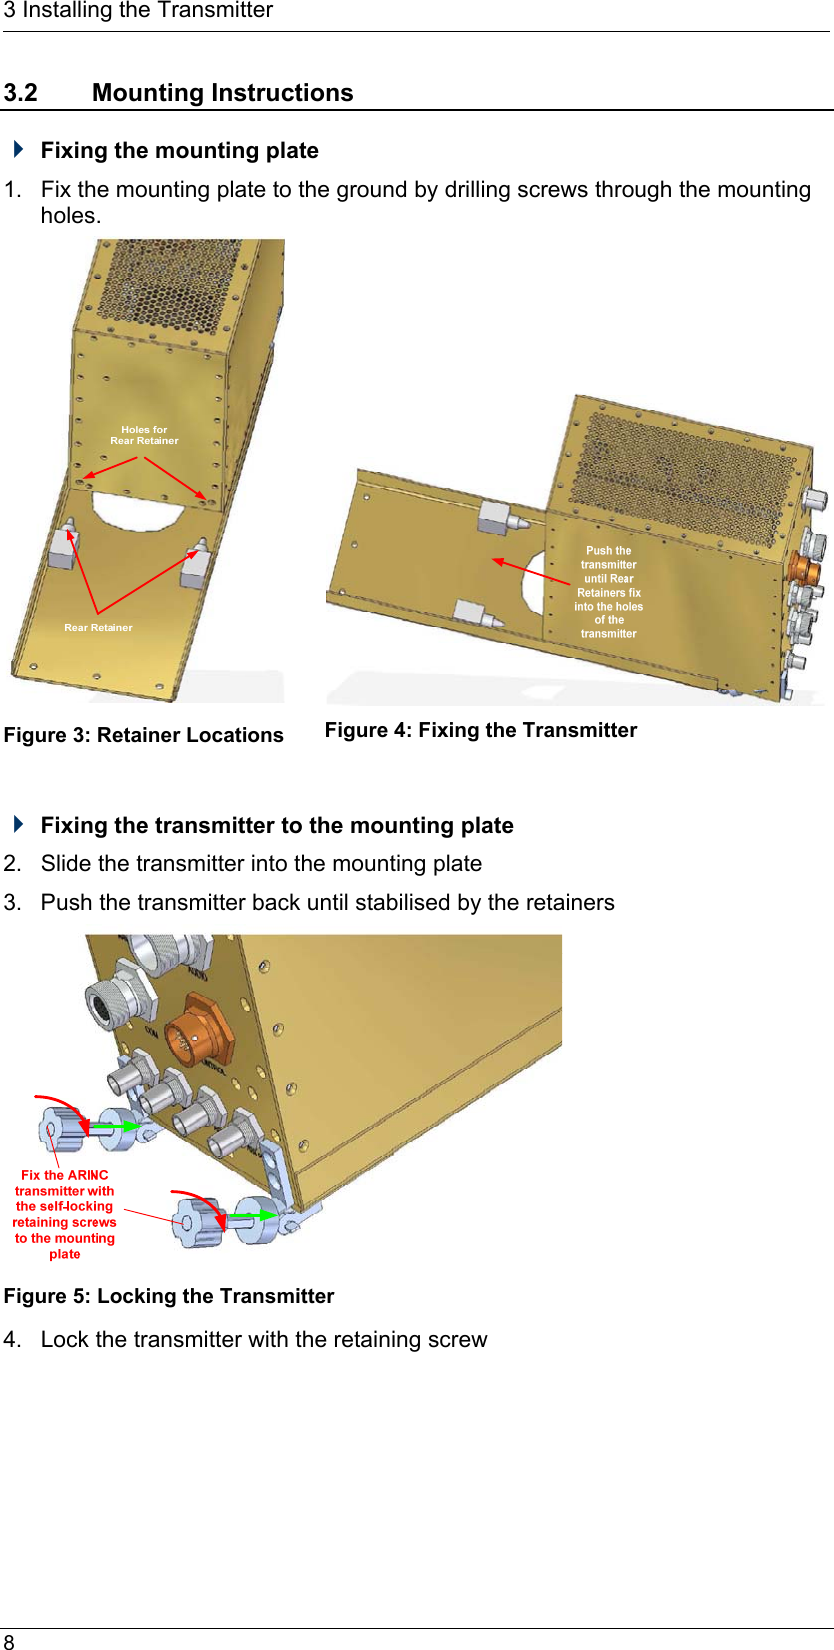  8  3 Installing the Transmitter 3.2 Mounting Instructions  Fixing the mounting plate 1.  Fix the mounting plate to the ground by drilling screws through the mounting holes.  Figure 3: Retainer Locations      Figure 4: Fixing the Transmitter   Fixing the transmitter to the mounting plate  2.  Slide the transmitter into the mounting plate 3.  Push the transmitter back until stabilised by the retainers  Figure 5: Locking the Transmitter 4.  Lock the transmitter with the retaining screw 